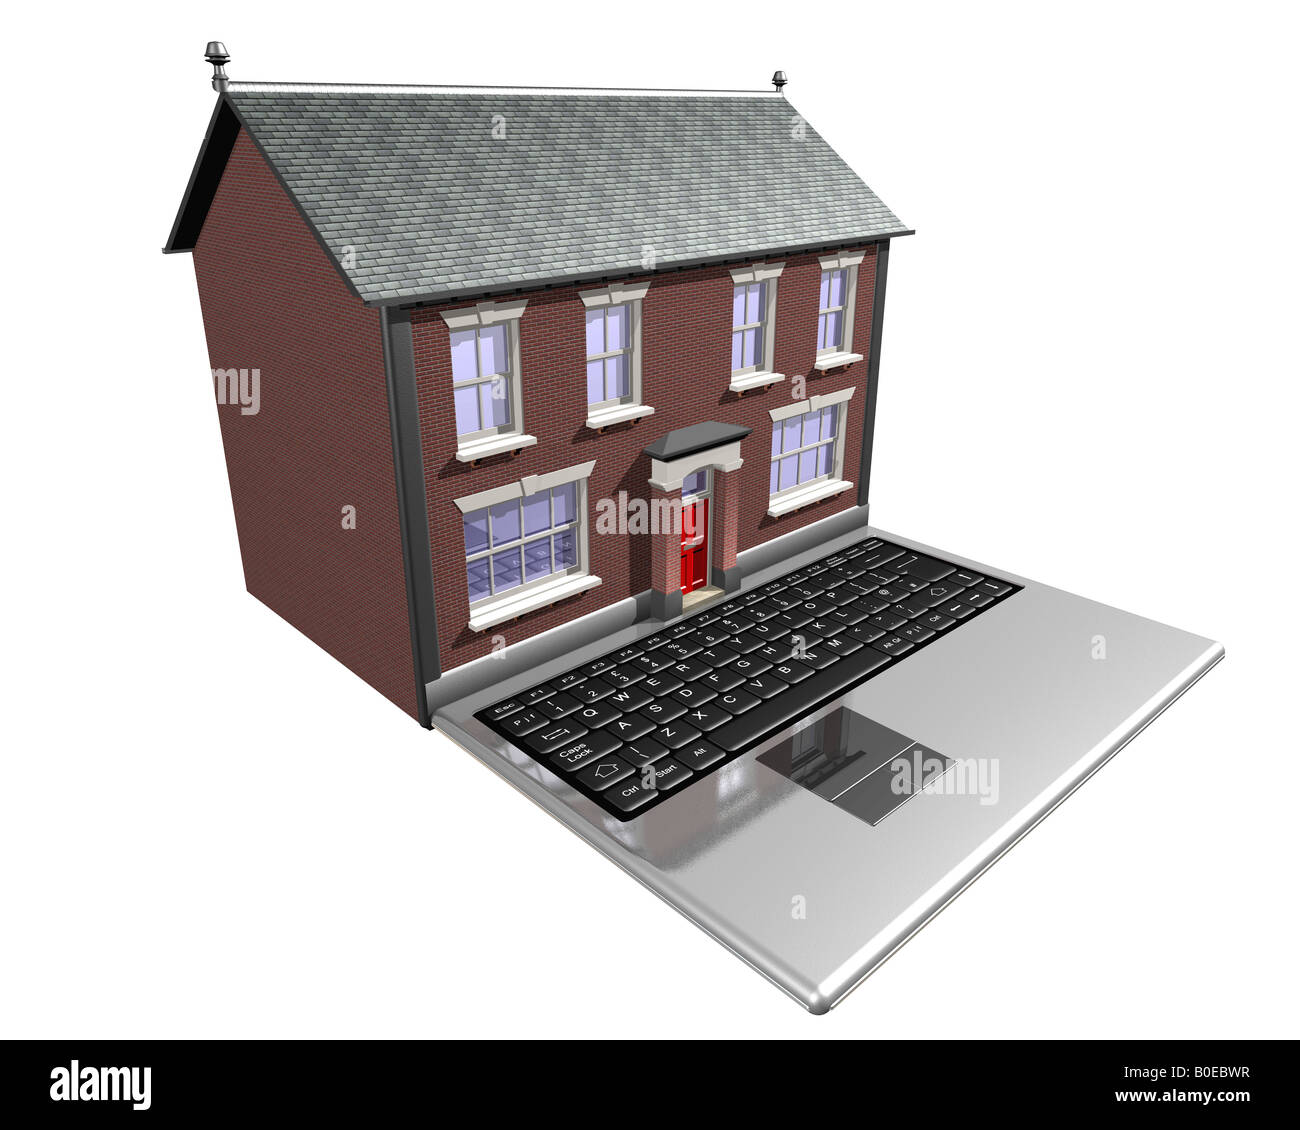 A laptop merged into a house representing the buying of a new home on the Internet Stock Photo